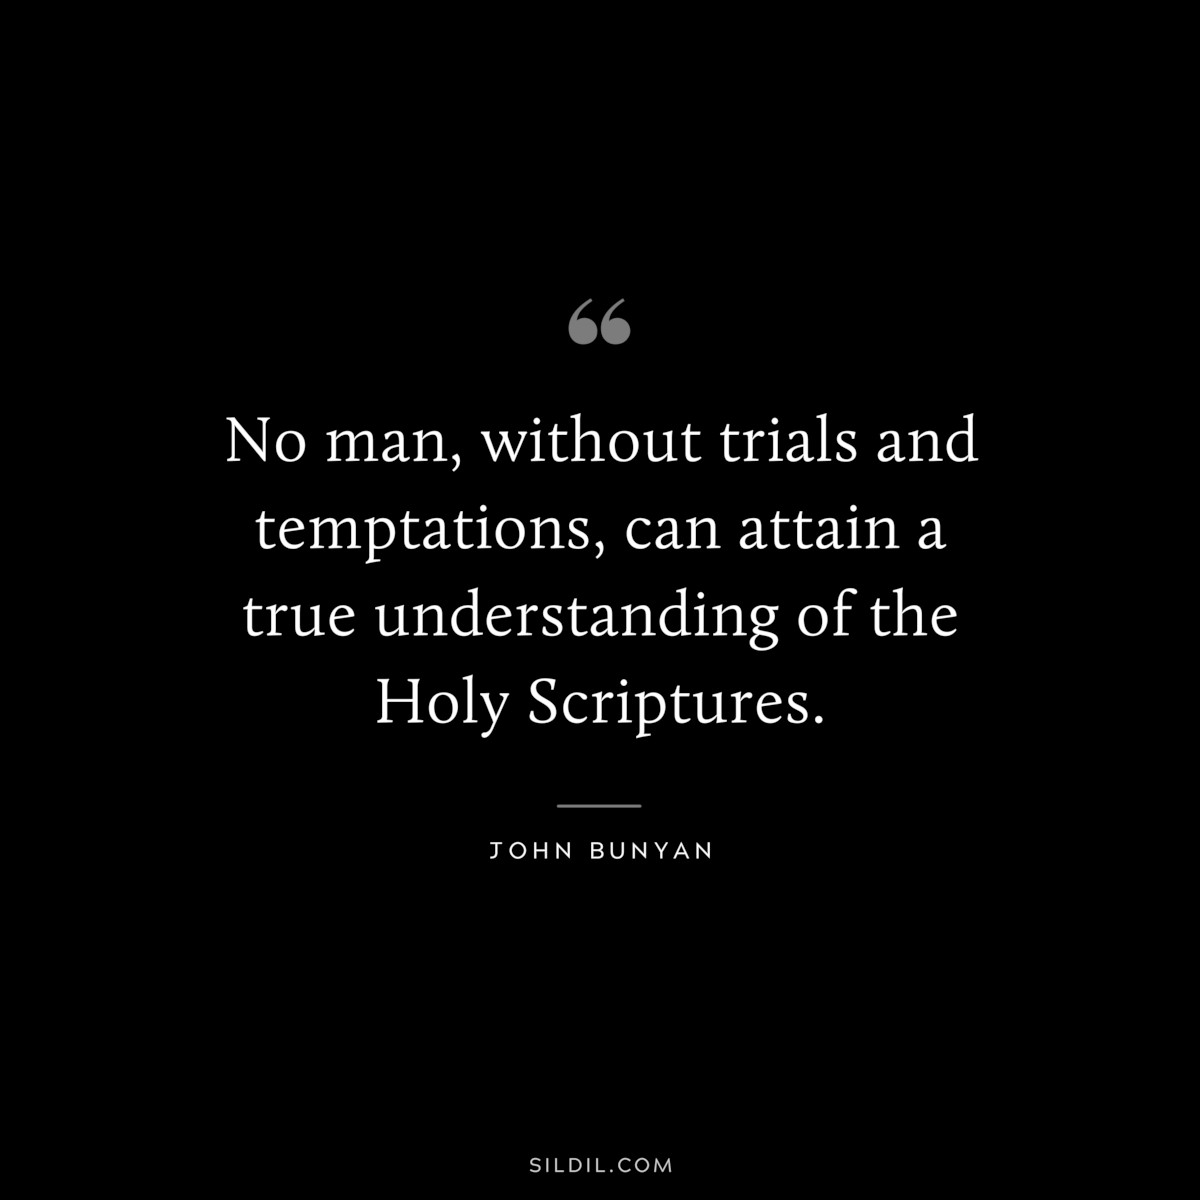 No man, without trials and temptations, can attain a true understanding of the Holy Scriptures. ― John Bunyan